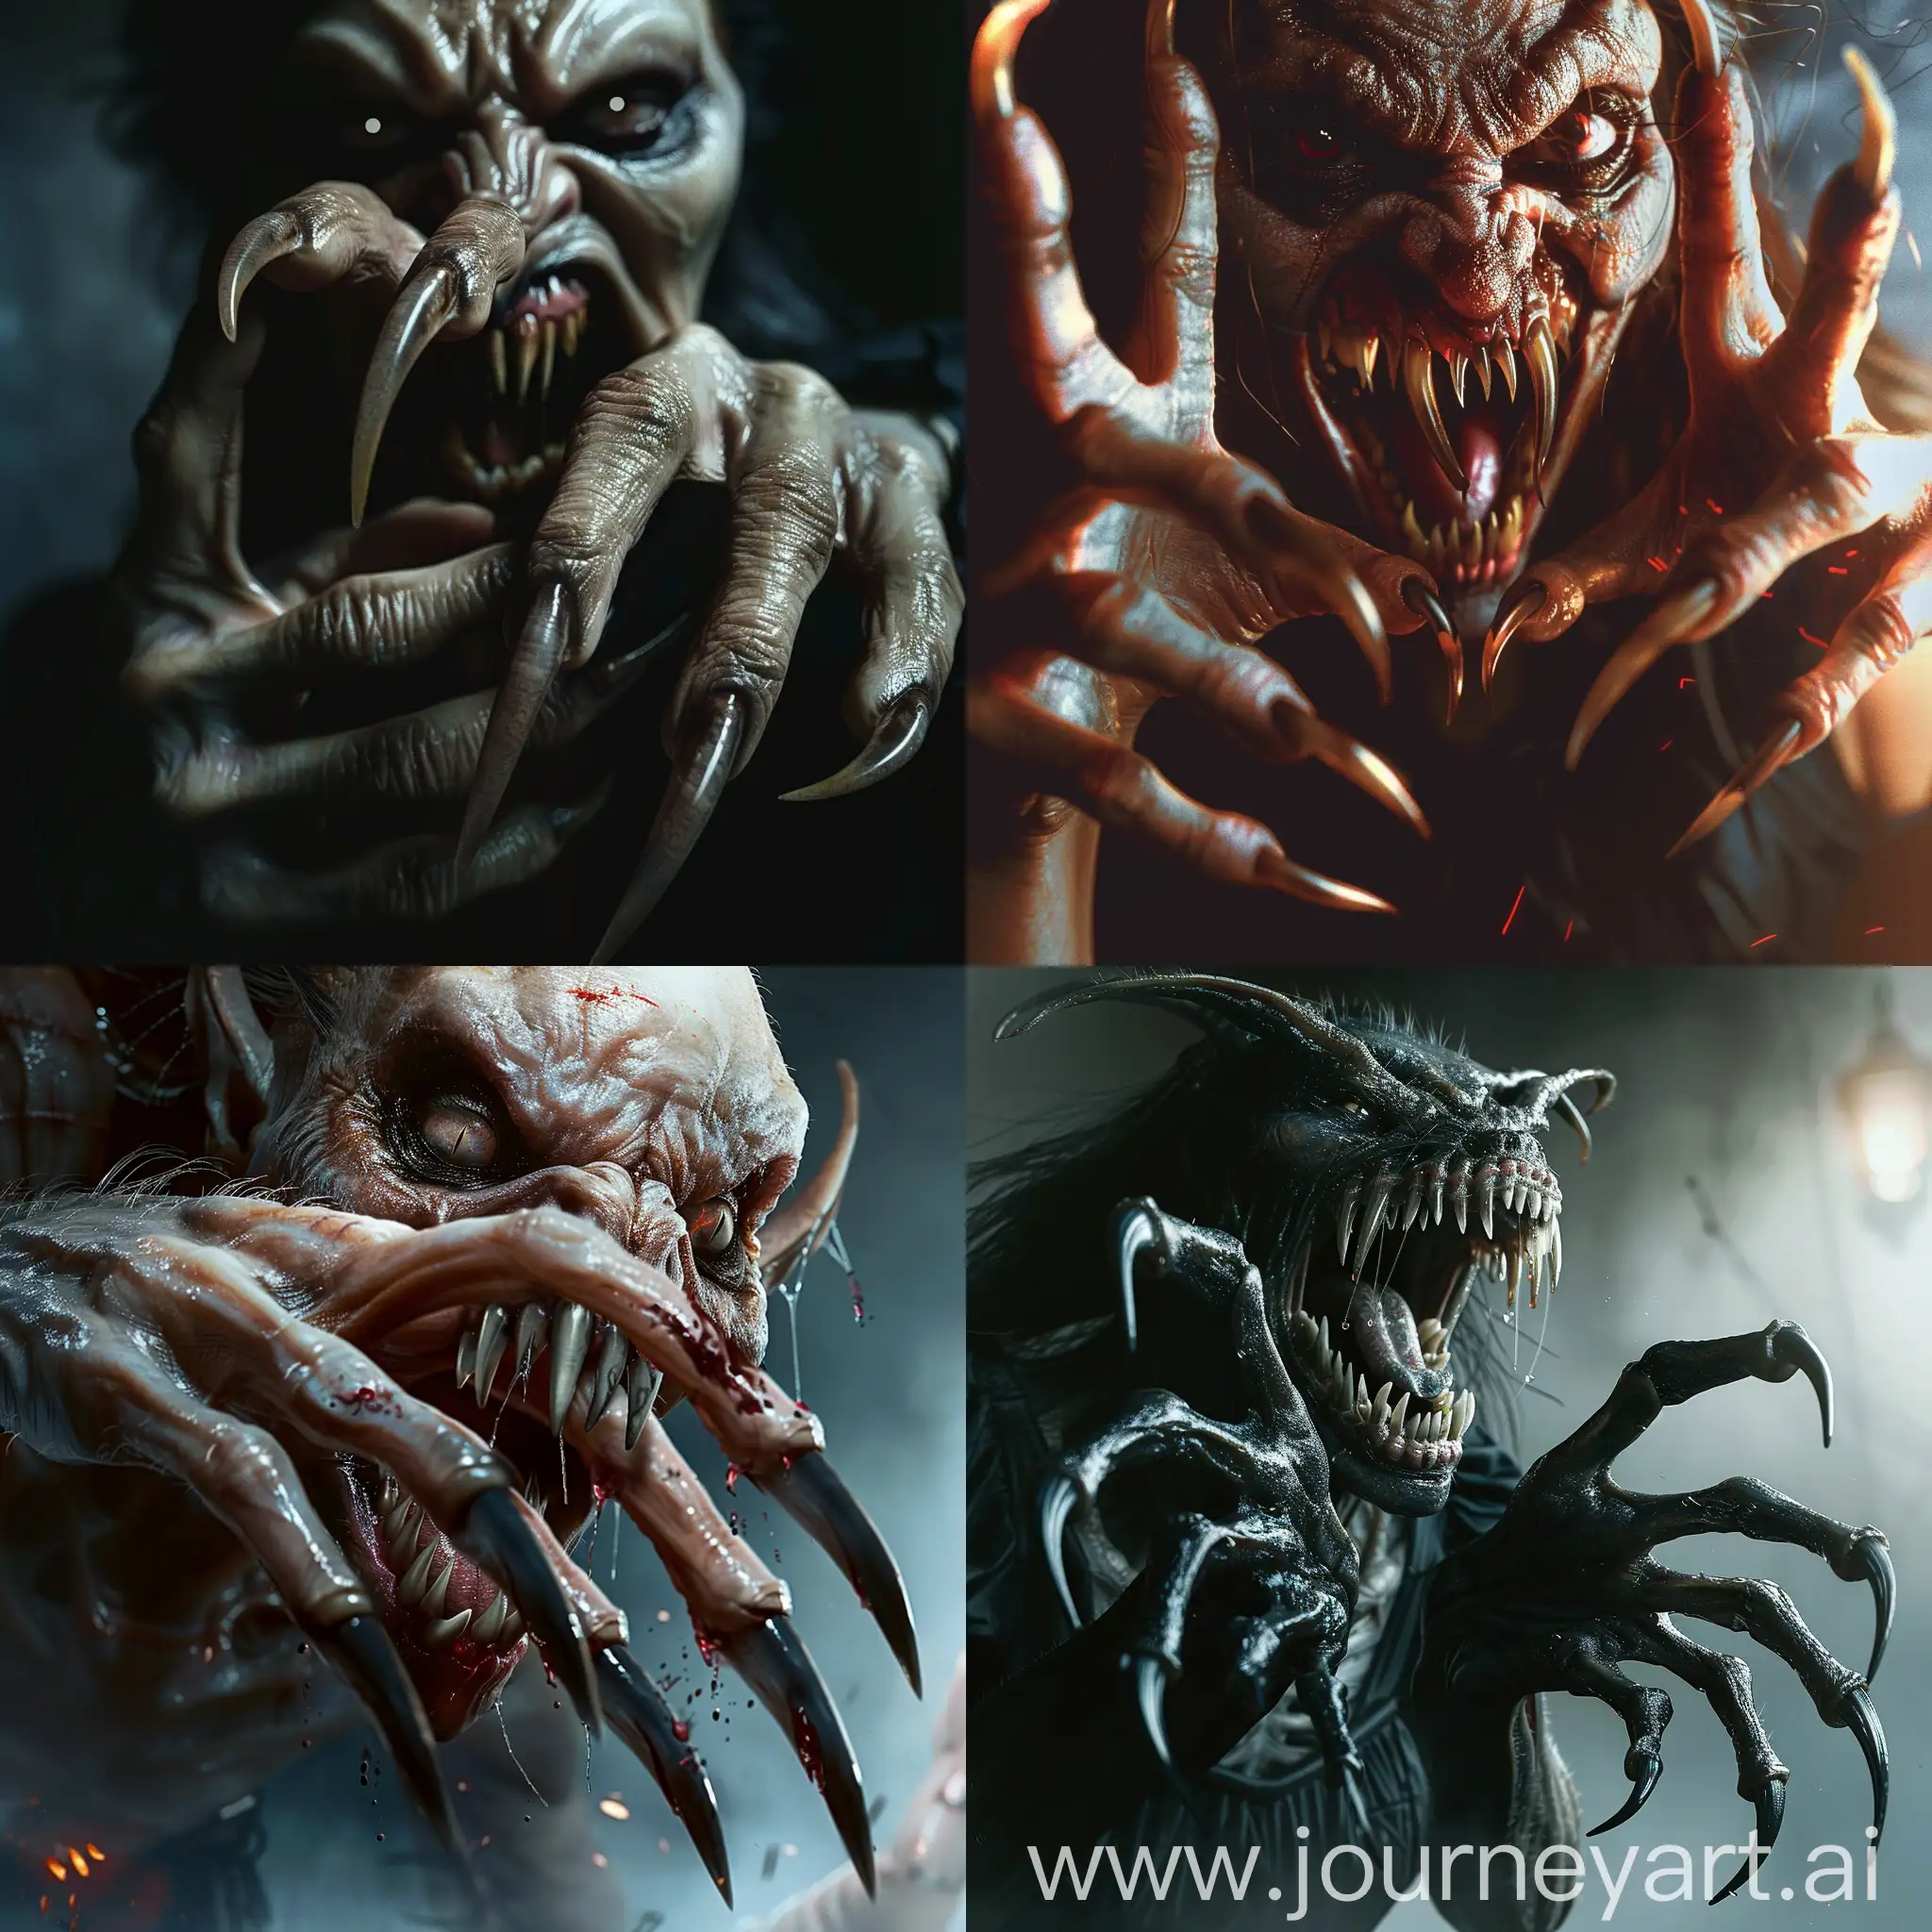 Photorealism of creature a monstruos female vampire with long curved pointed  nails, she aggressive attack, pointed crocked teeth scary expression, dark atmosphere, high quality, photorealistic, terrifying, aggressive,scary predator fangs, detailed nails, horror, atmospheric lighting, full body, realistic hyper - detail, playful character designs, full anatomical. human hands, very clear without flaws with five fingers